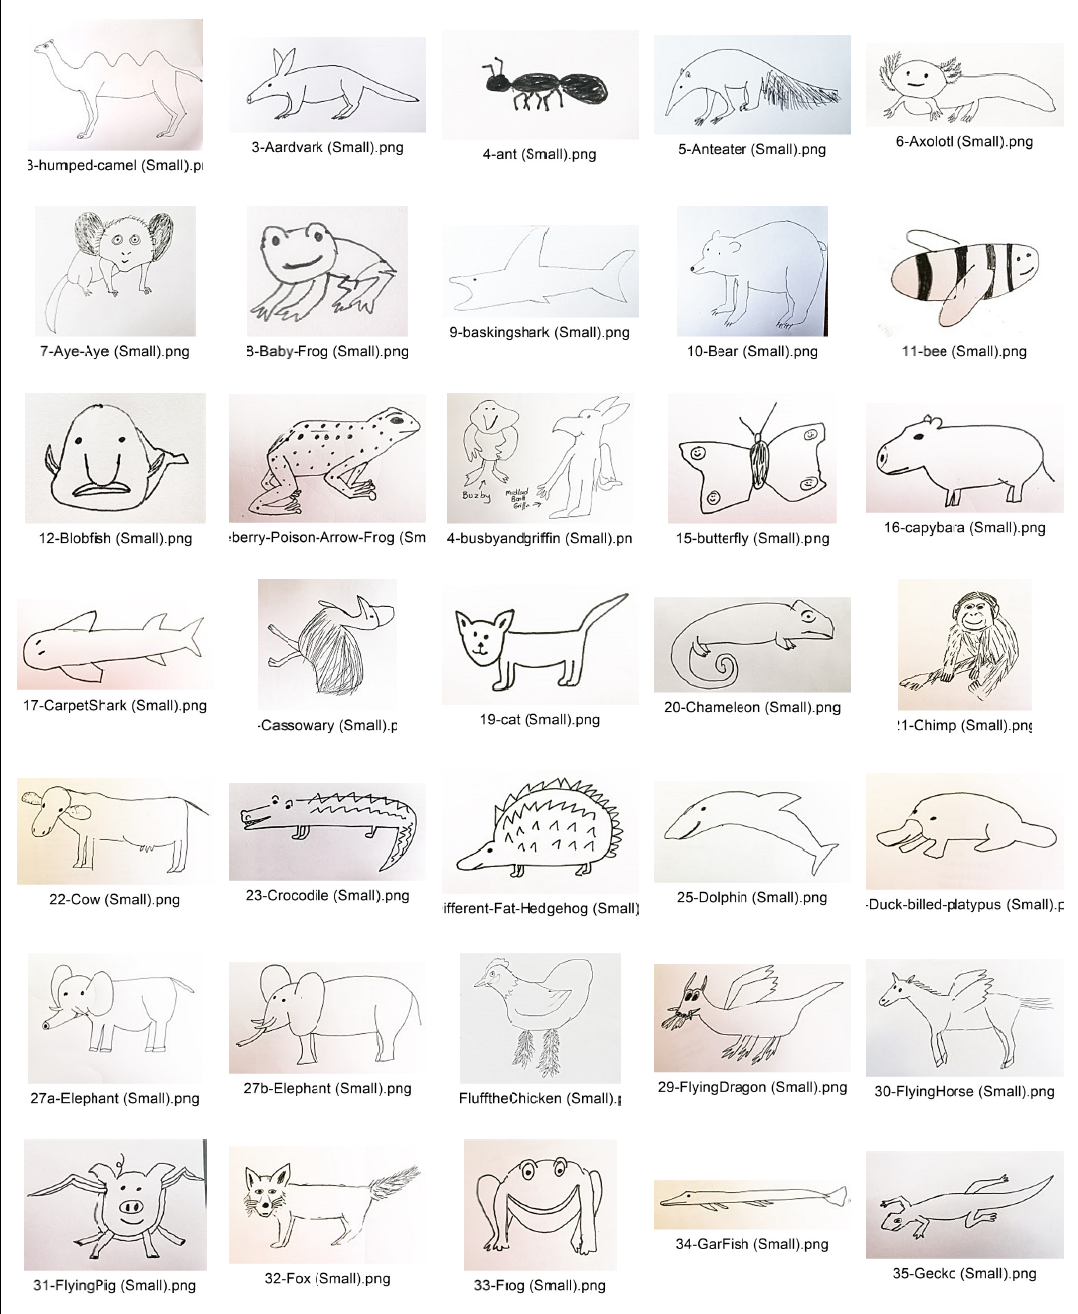 Gallery of 100 badly drawn animals